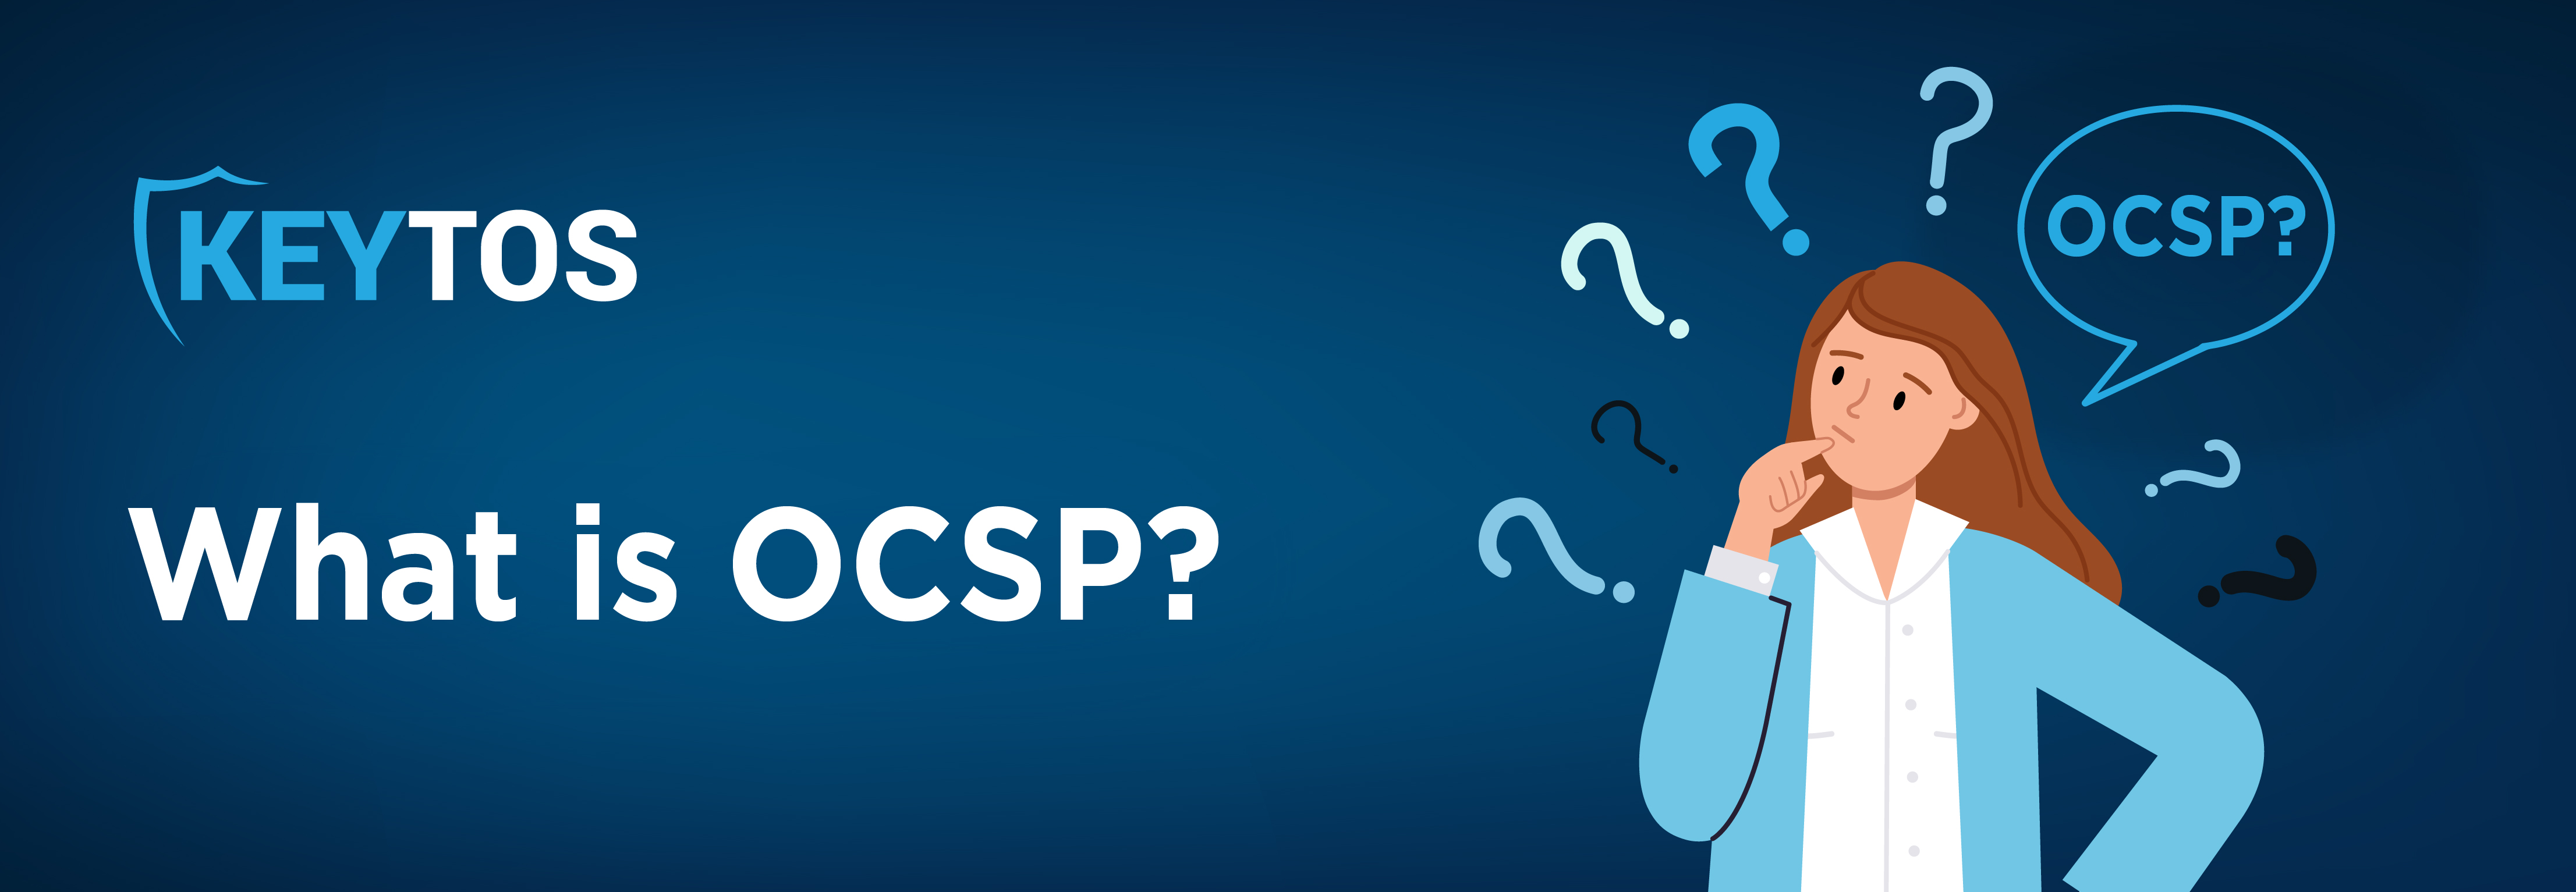 What is OCSP (Online Certificate Status Protocol)?